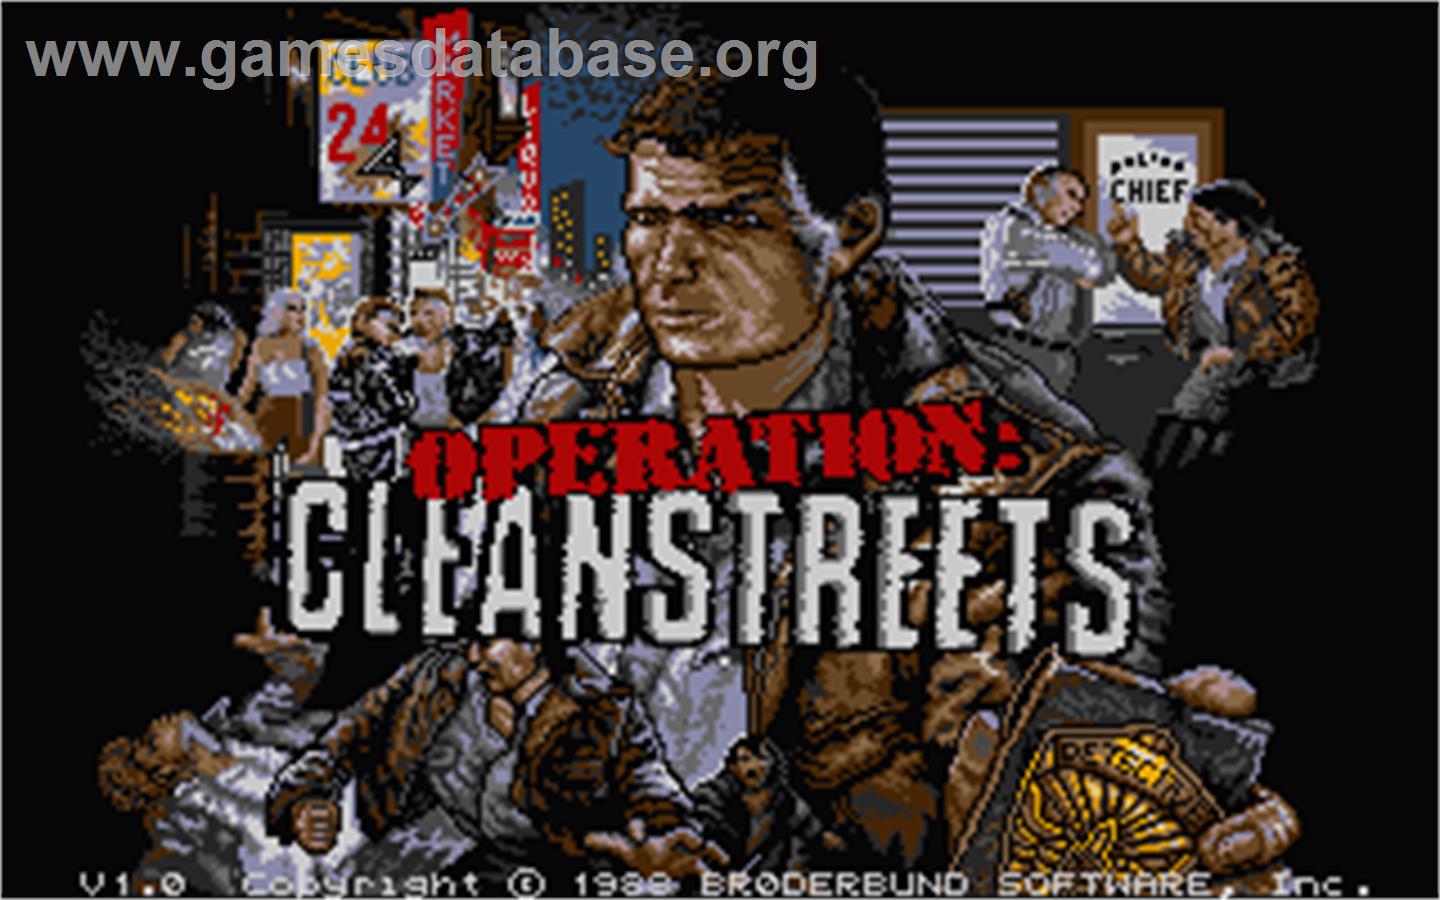 Operation: Cleanstreets - Atari ST - Artwork - Title Screen